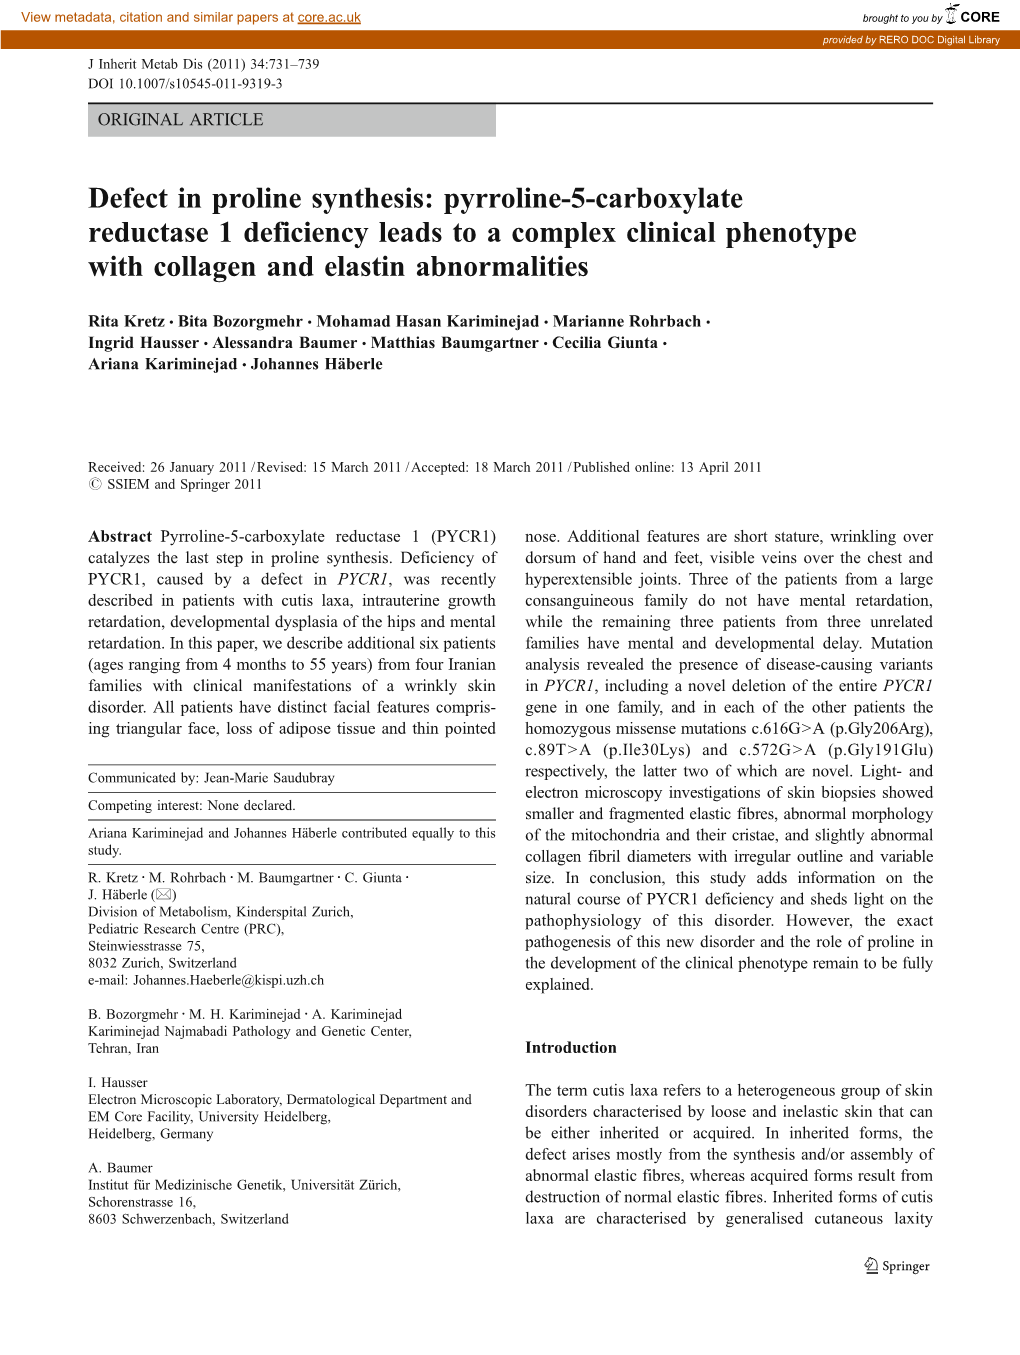 Defect in Proline Synthesis: Pyrroline-5-Carboxylate Reductase 1 Deficiency Leads to a Complex Clinical Phenotype with Collagen and Elastin Abnormalities